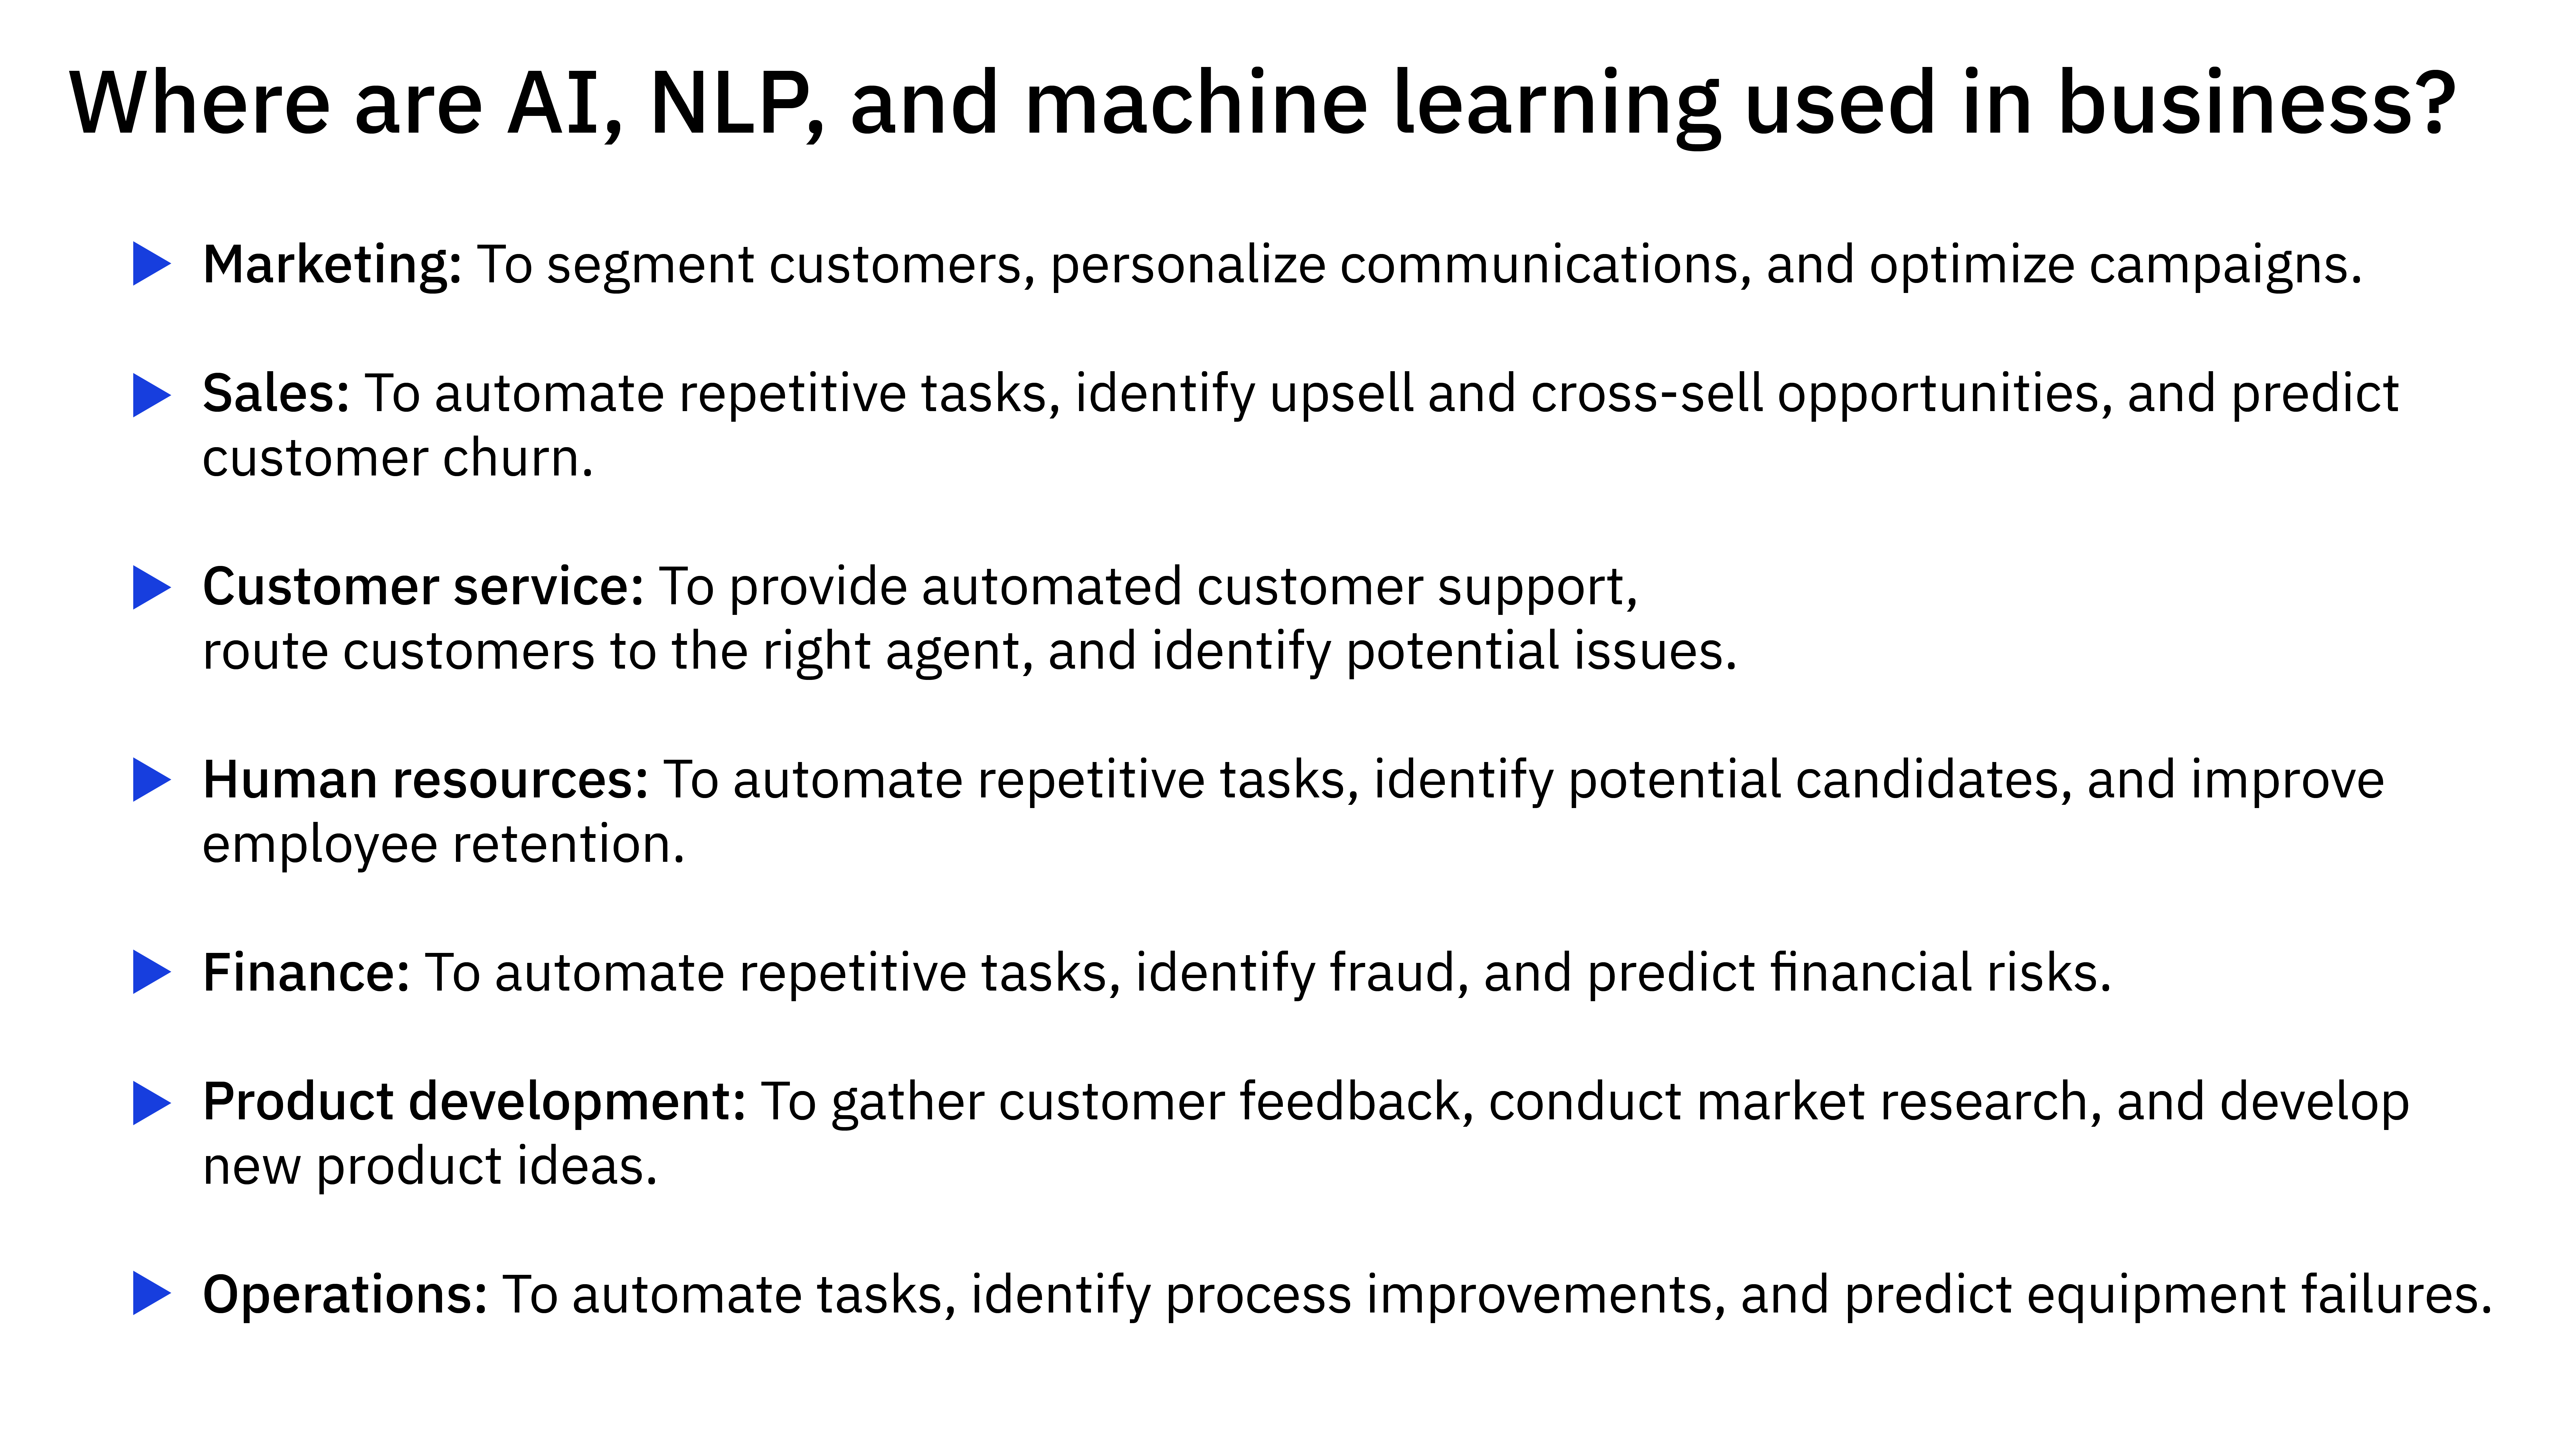 Where are AI, NLP, and machine learning used in business?